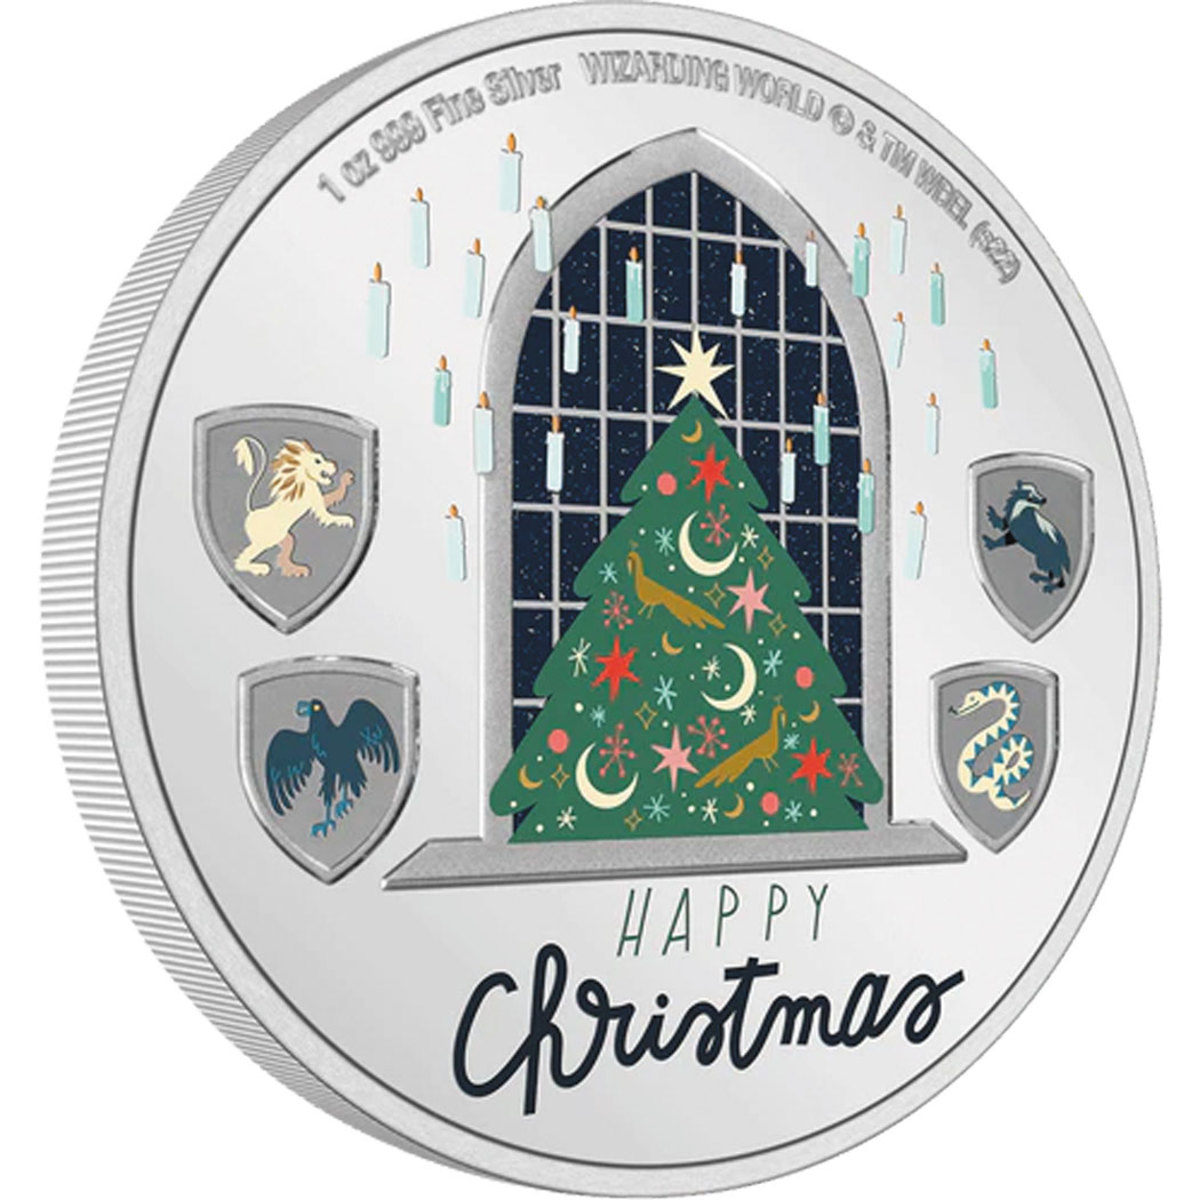 New Zealand, on behalf of Niue, has released these two coins with  Harry Potter™ and Star Wars™ themes  for the holiday season. (Images courtesy New Zealand Mint.) 